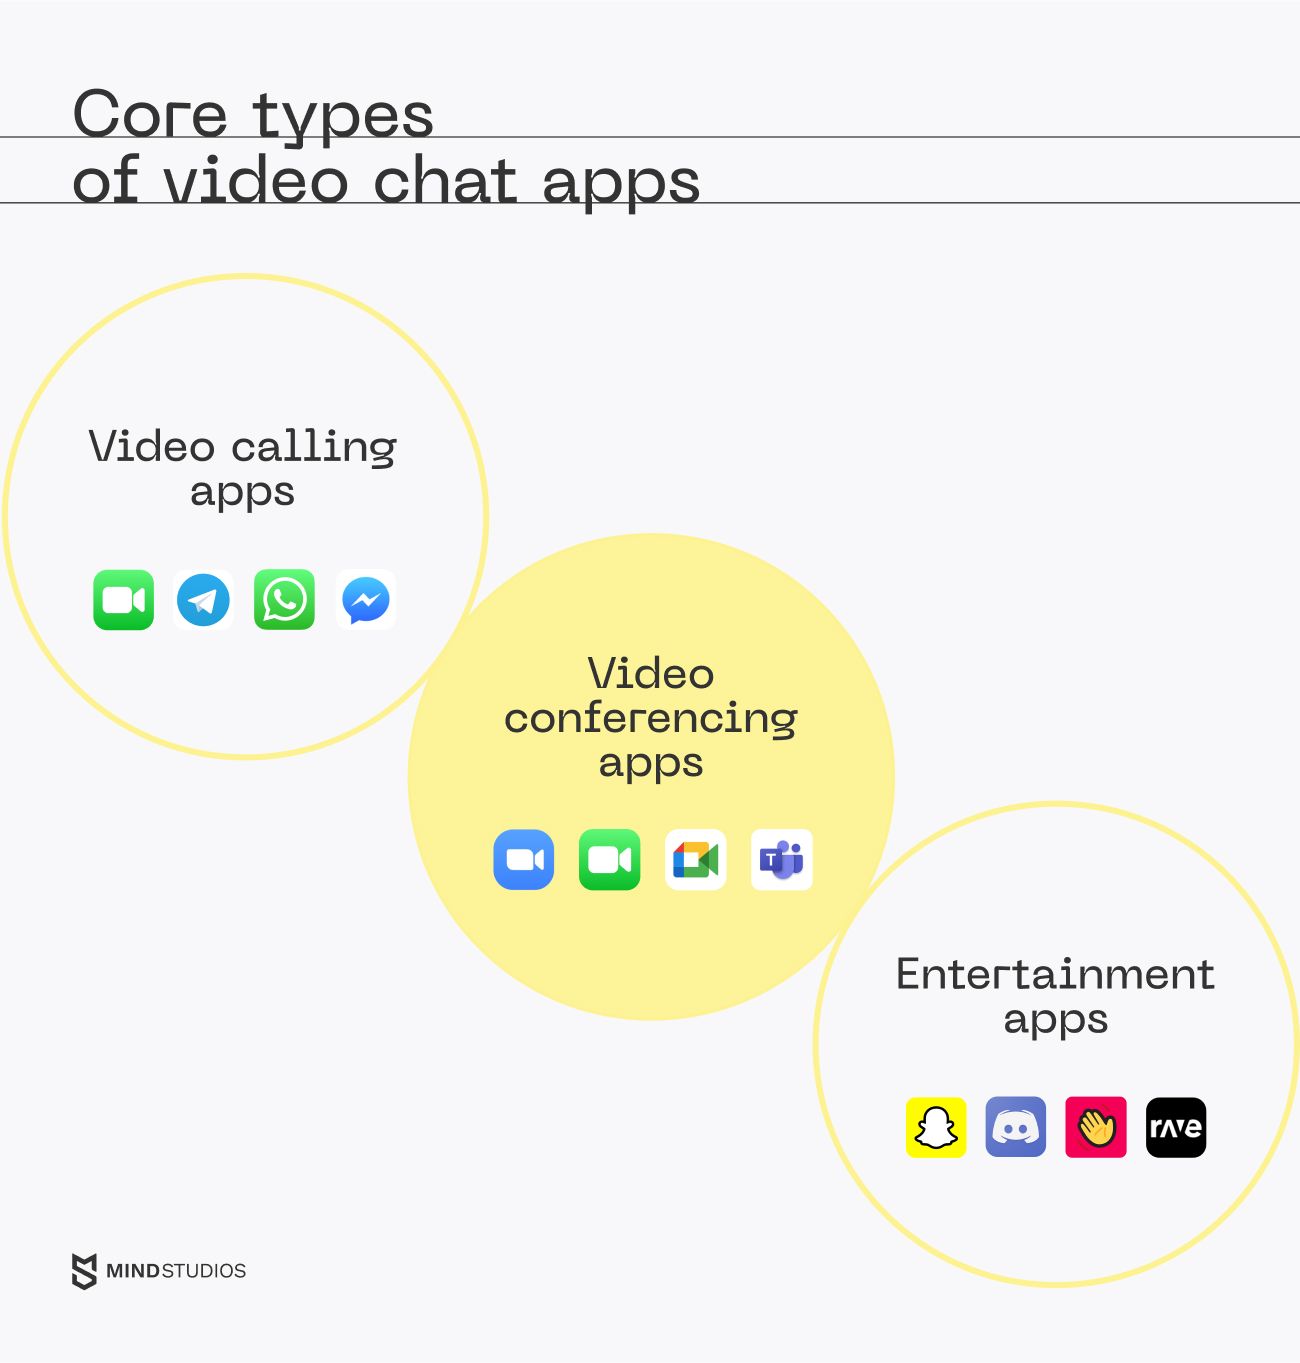 Core types of video chat apps